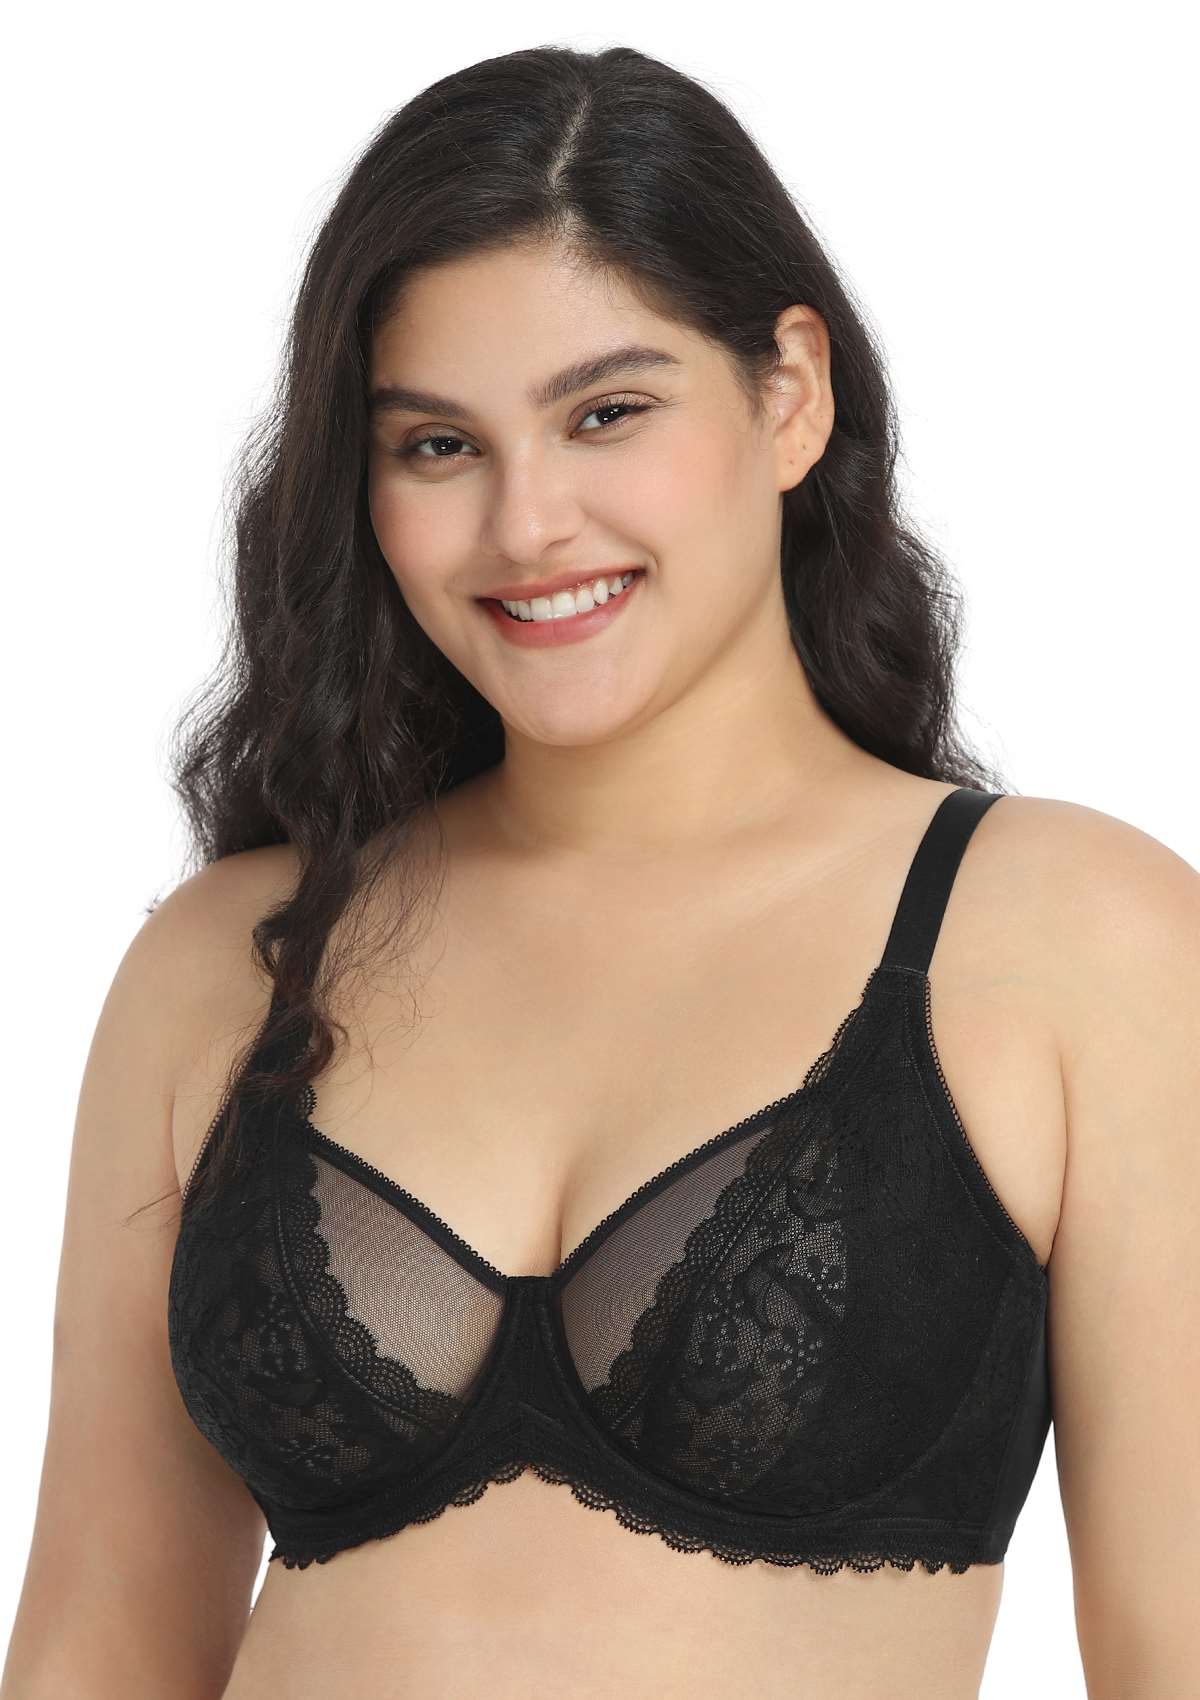 HSIA Anemone Big Bra: Best Bra For Lift And Support, Floral Bra - Black / 42 / C